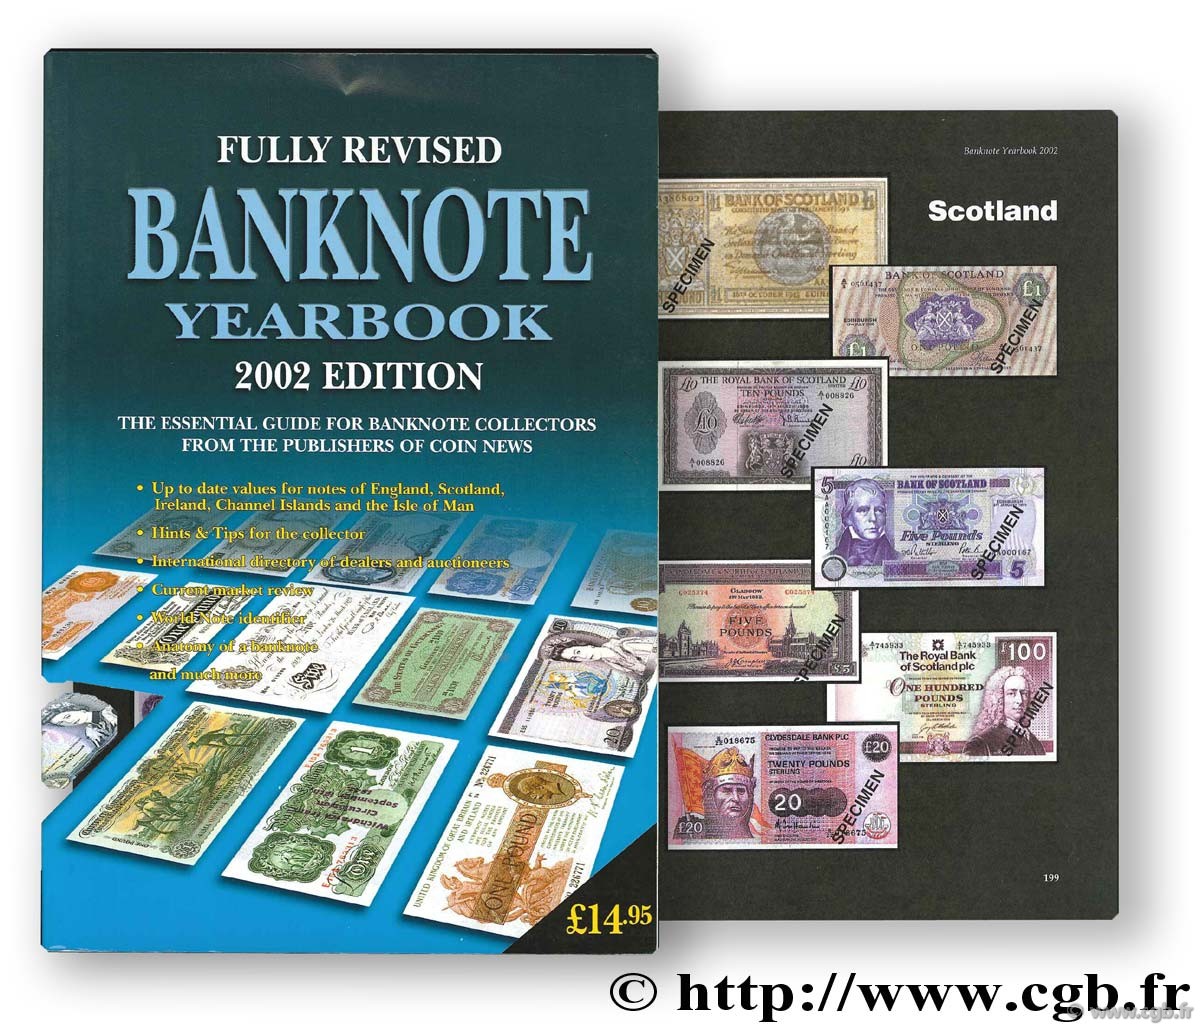 Banknote yearbook 2002. England, Scotland, Ireland, Channel Islands and the Isle of Man 